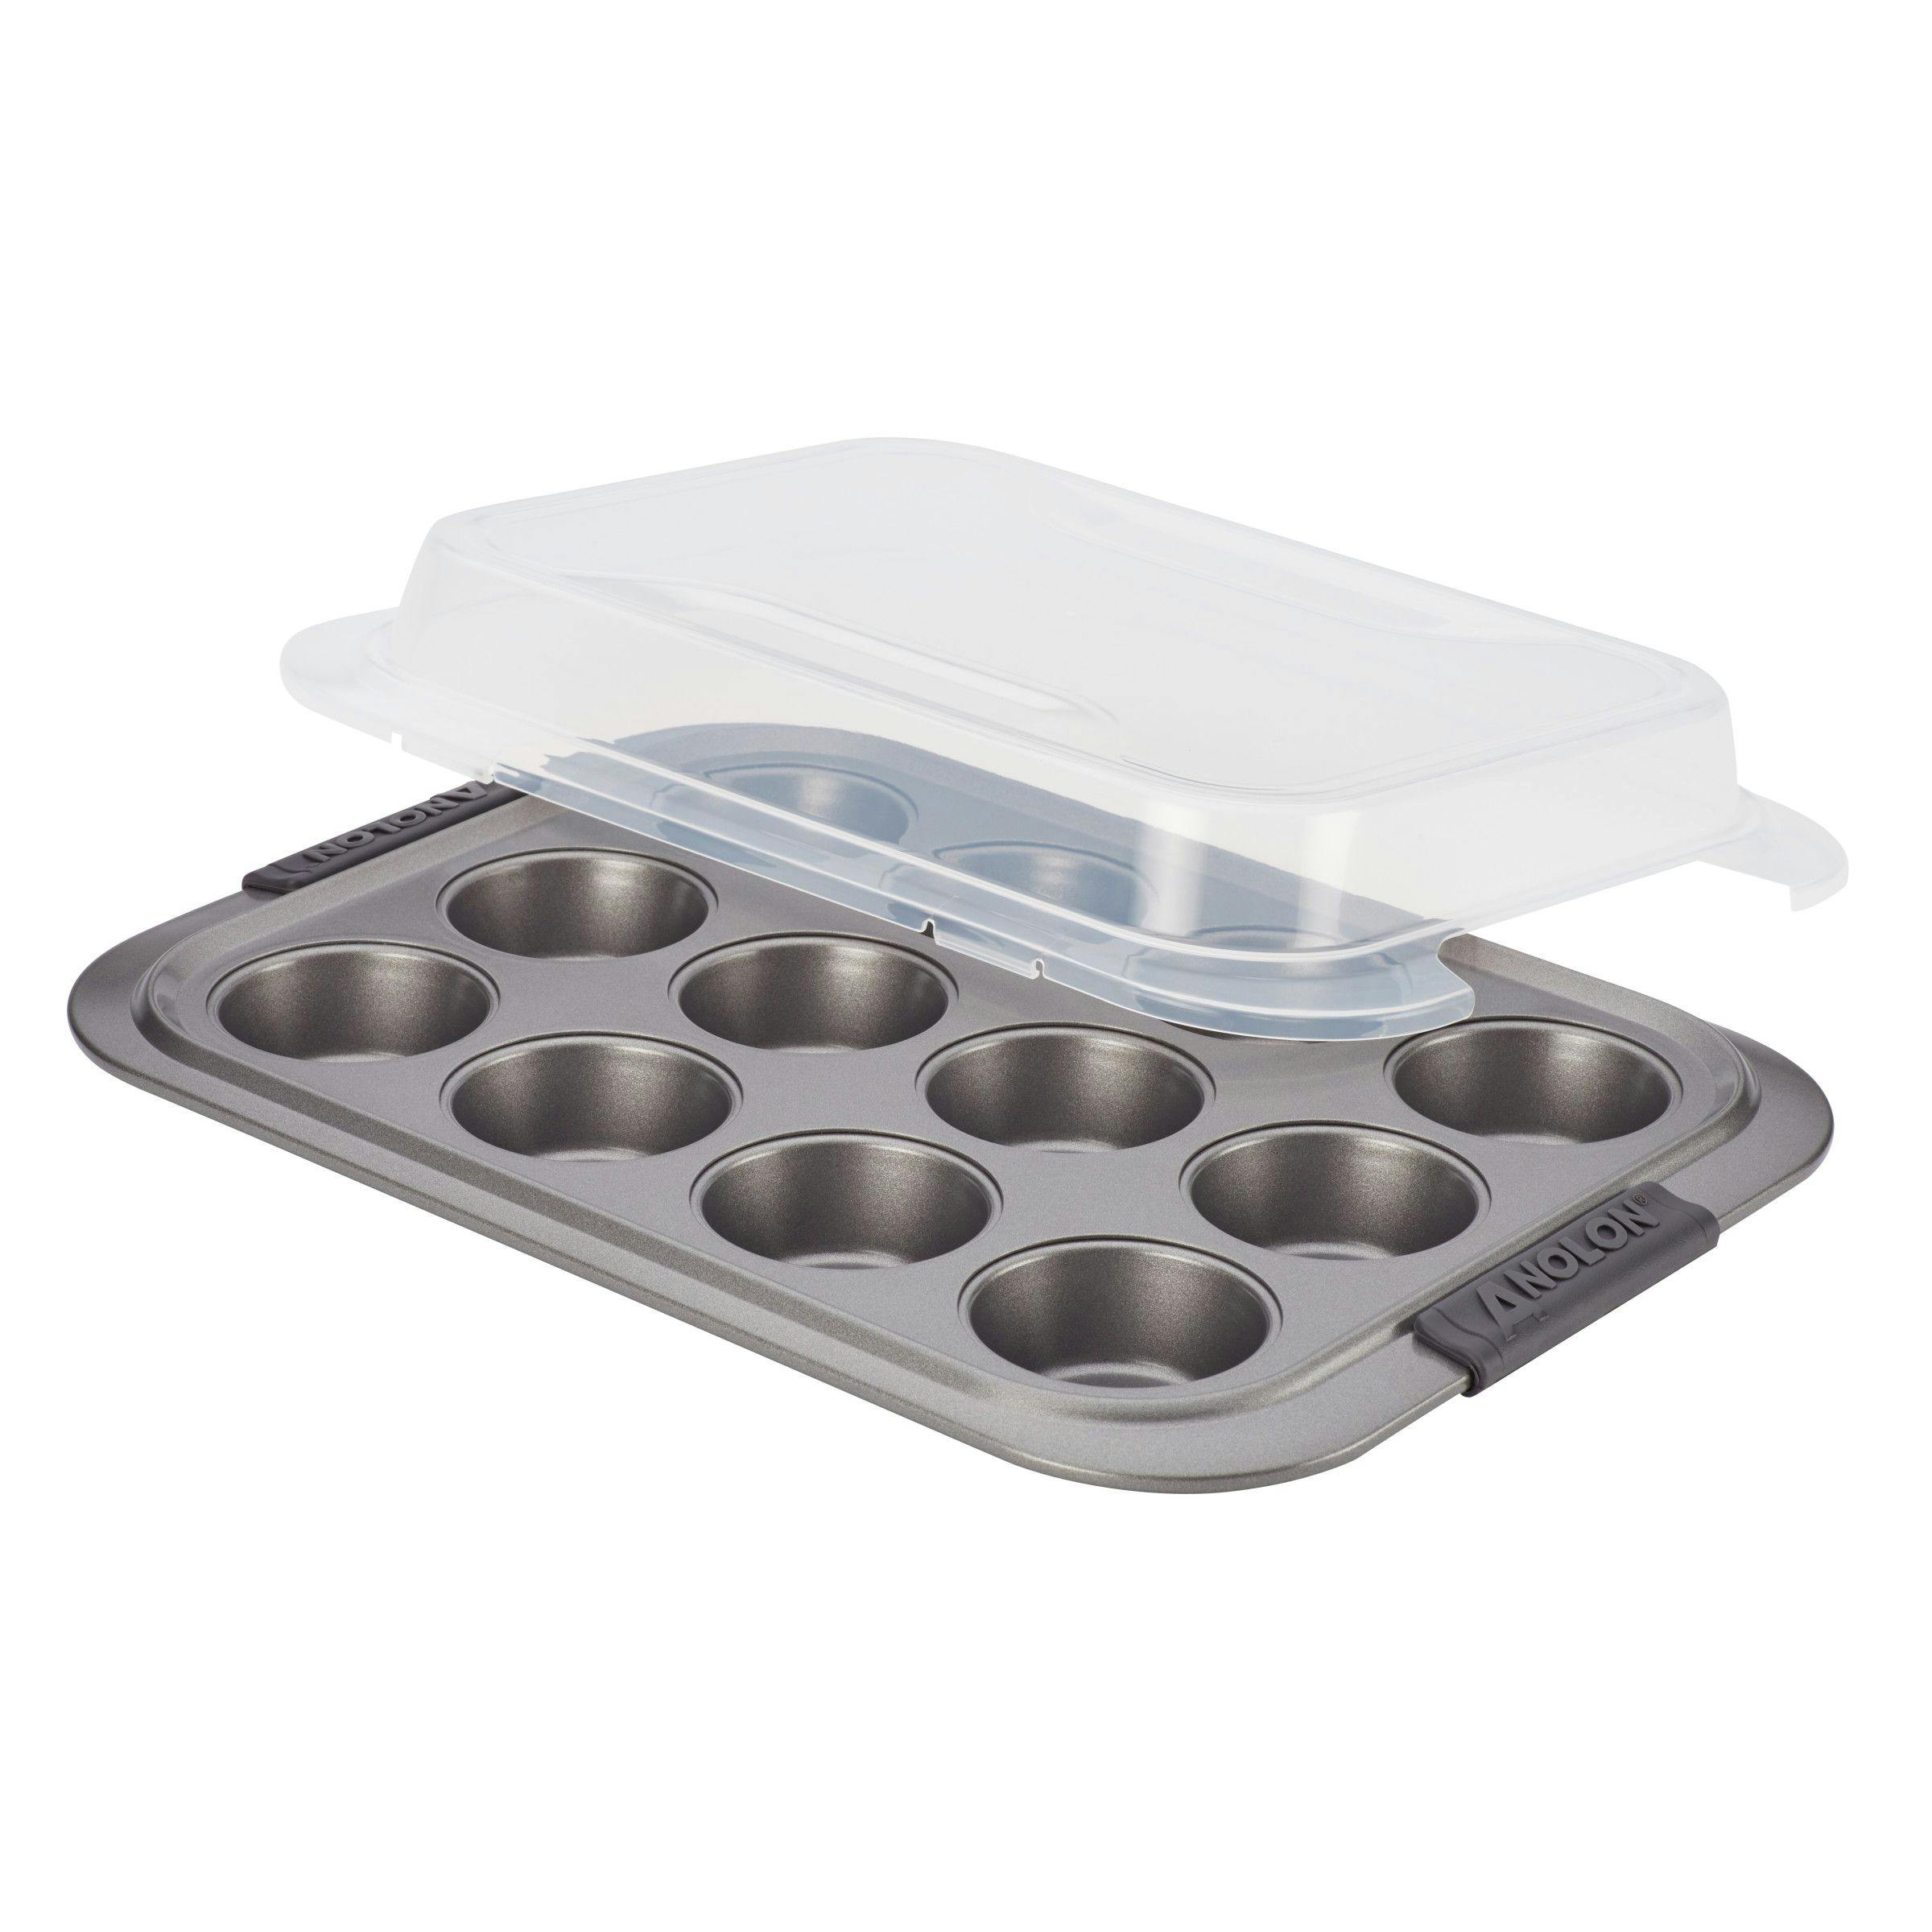 Anolon Advanced 12-Cup Muffin Pan with Lid